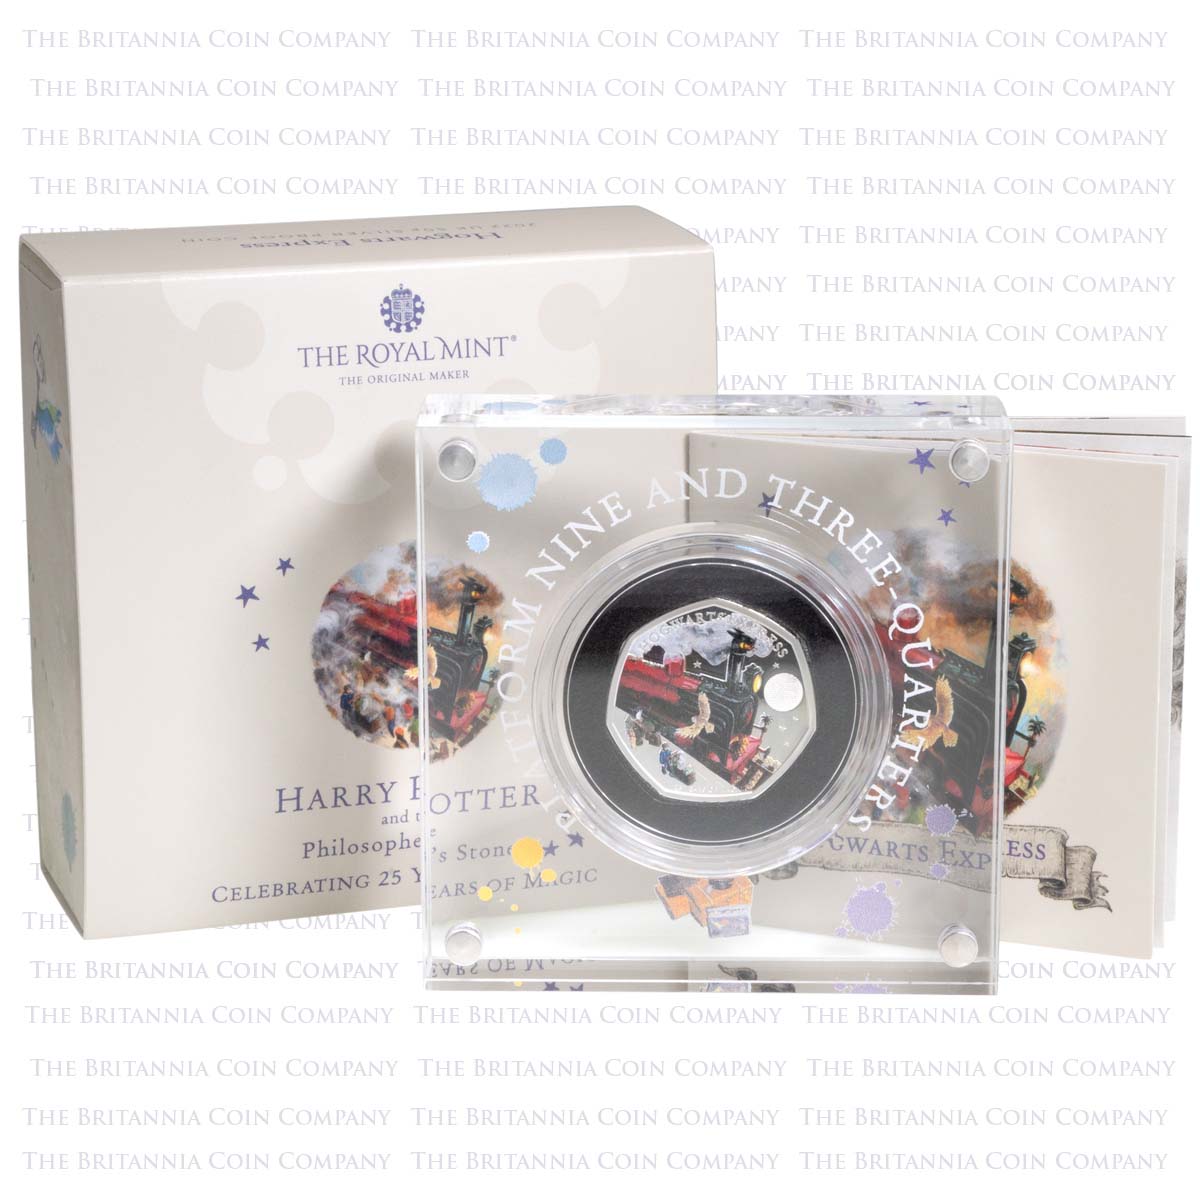 2022 Harry Potter Hogwarts Express Fifty Pence Coloured Silver Proof Coin2022 Harry Potter Hogwarts Express Fifty Pence Coloured Silver Proof Coin Original Packaging